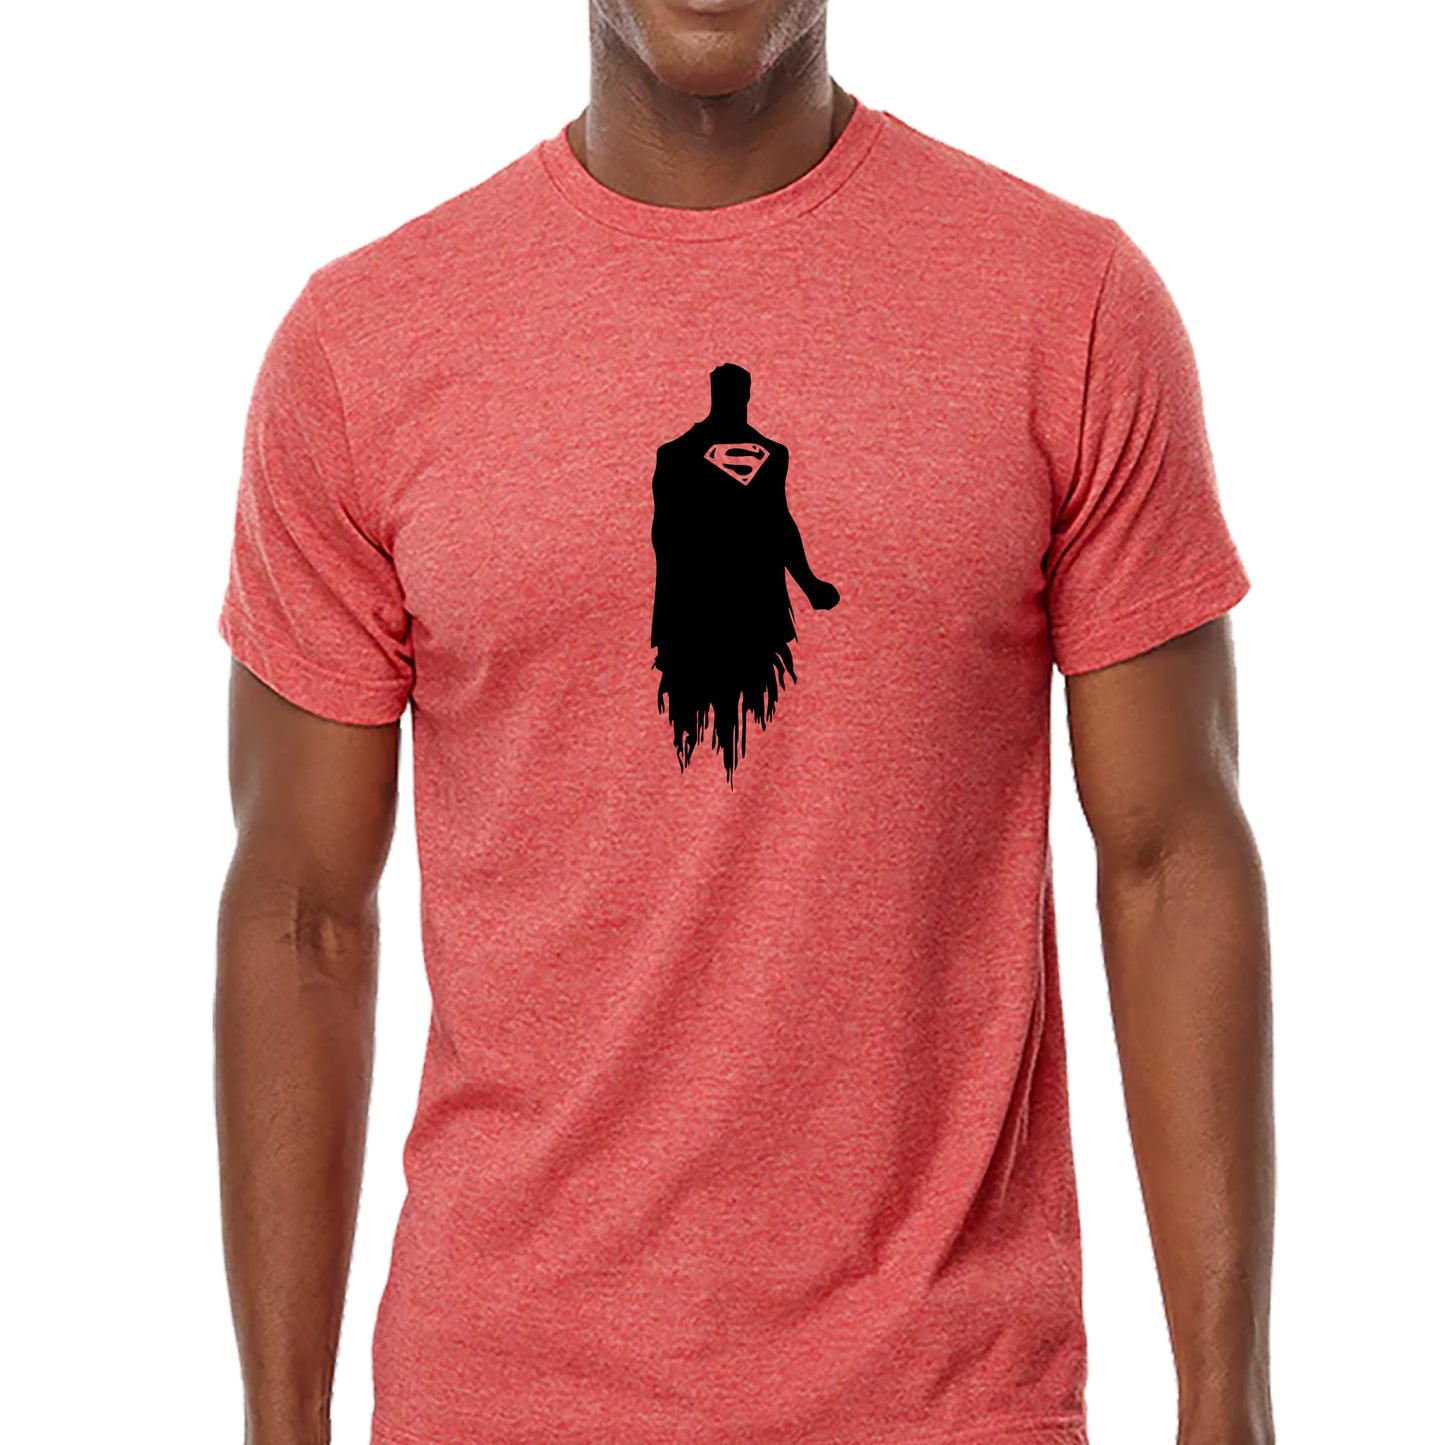 Silhouette of Superman T-shirt